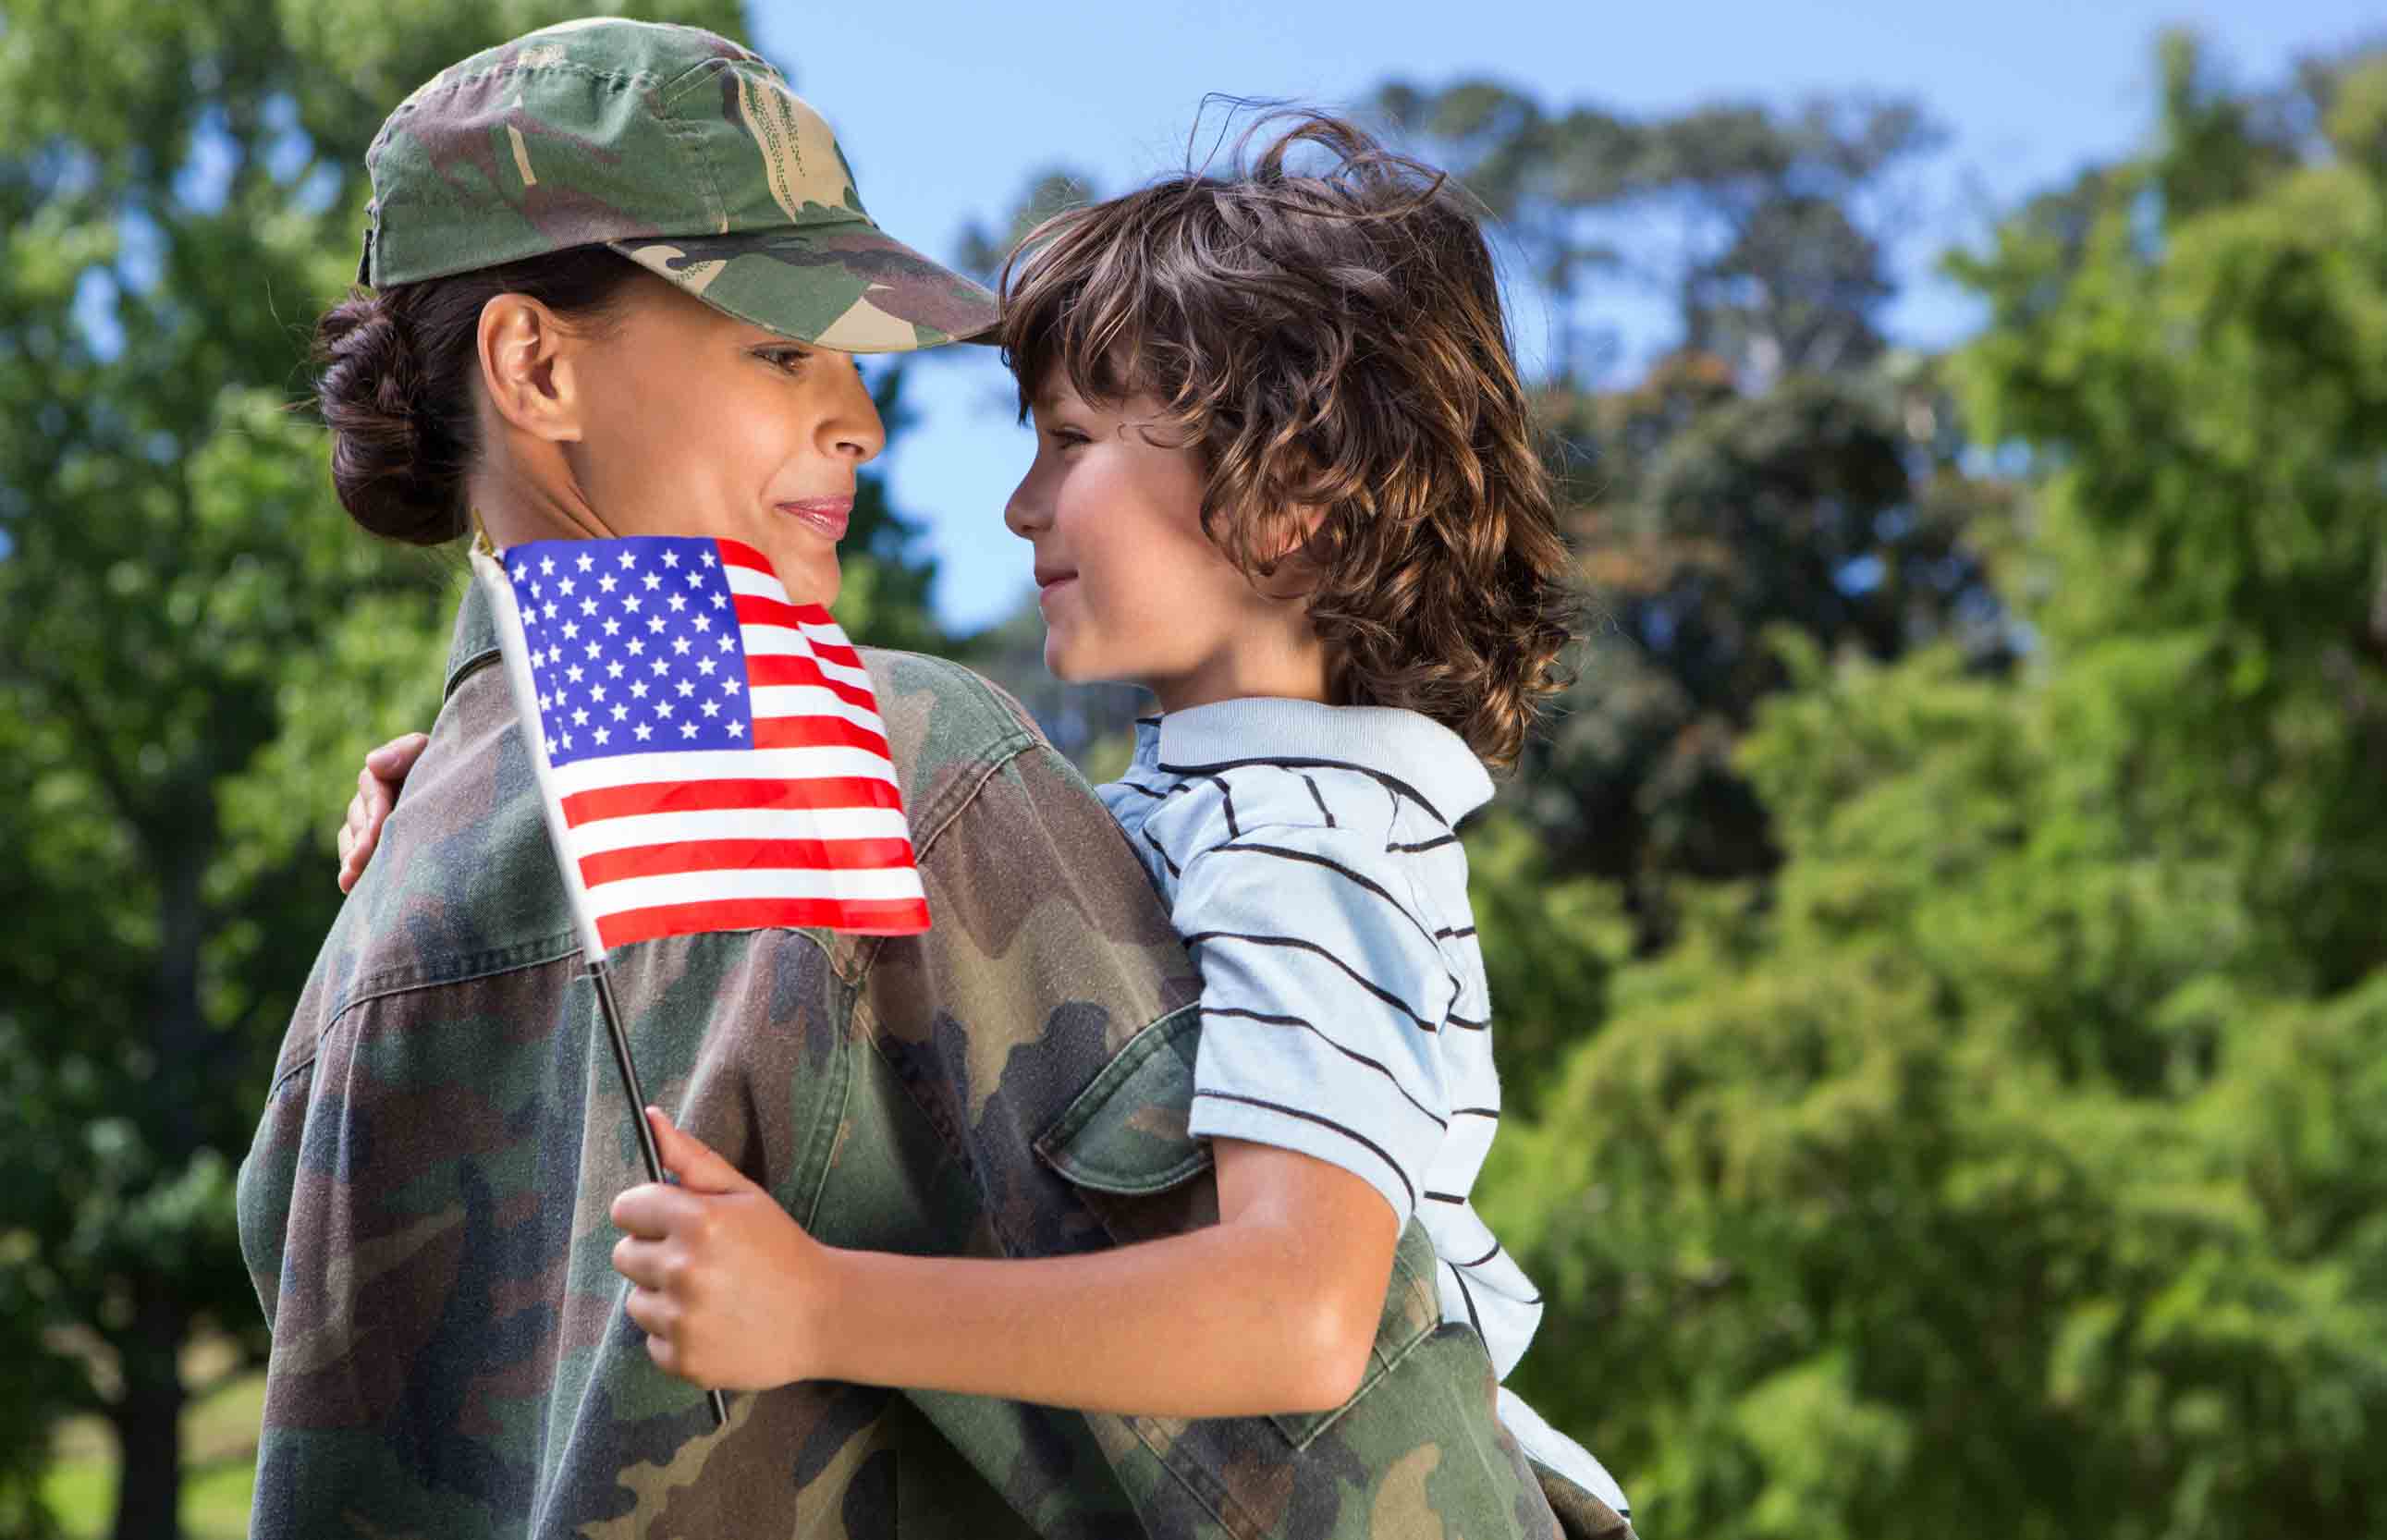 Veterans are faced with some unique money challenges. Fortunately, there are ways for them to get an affordable loan.